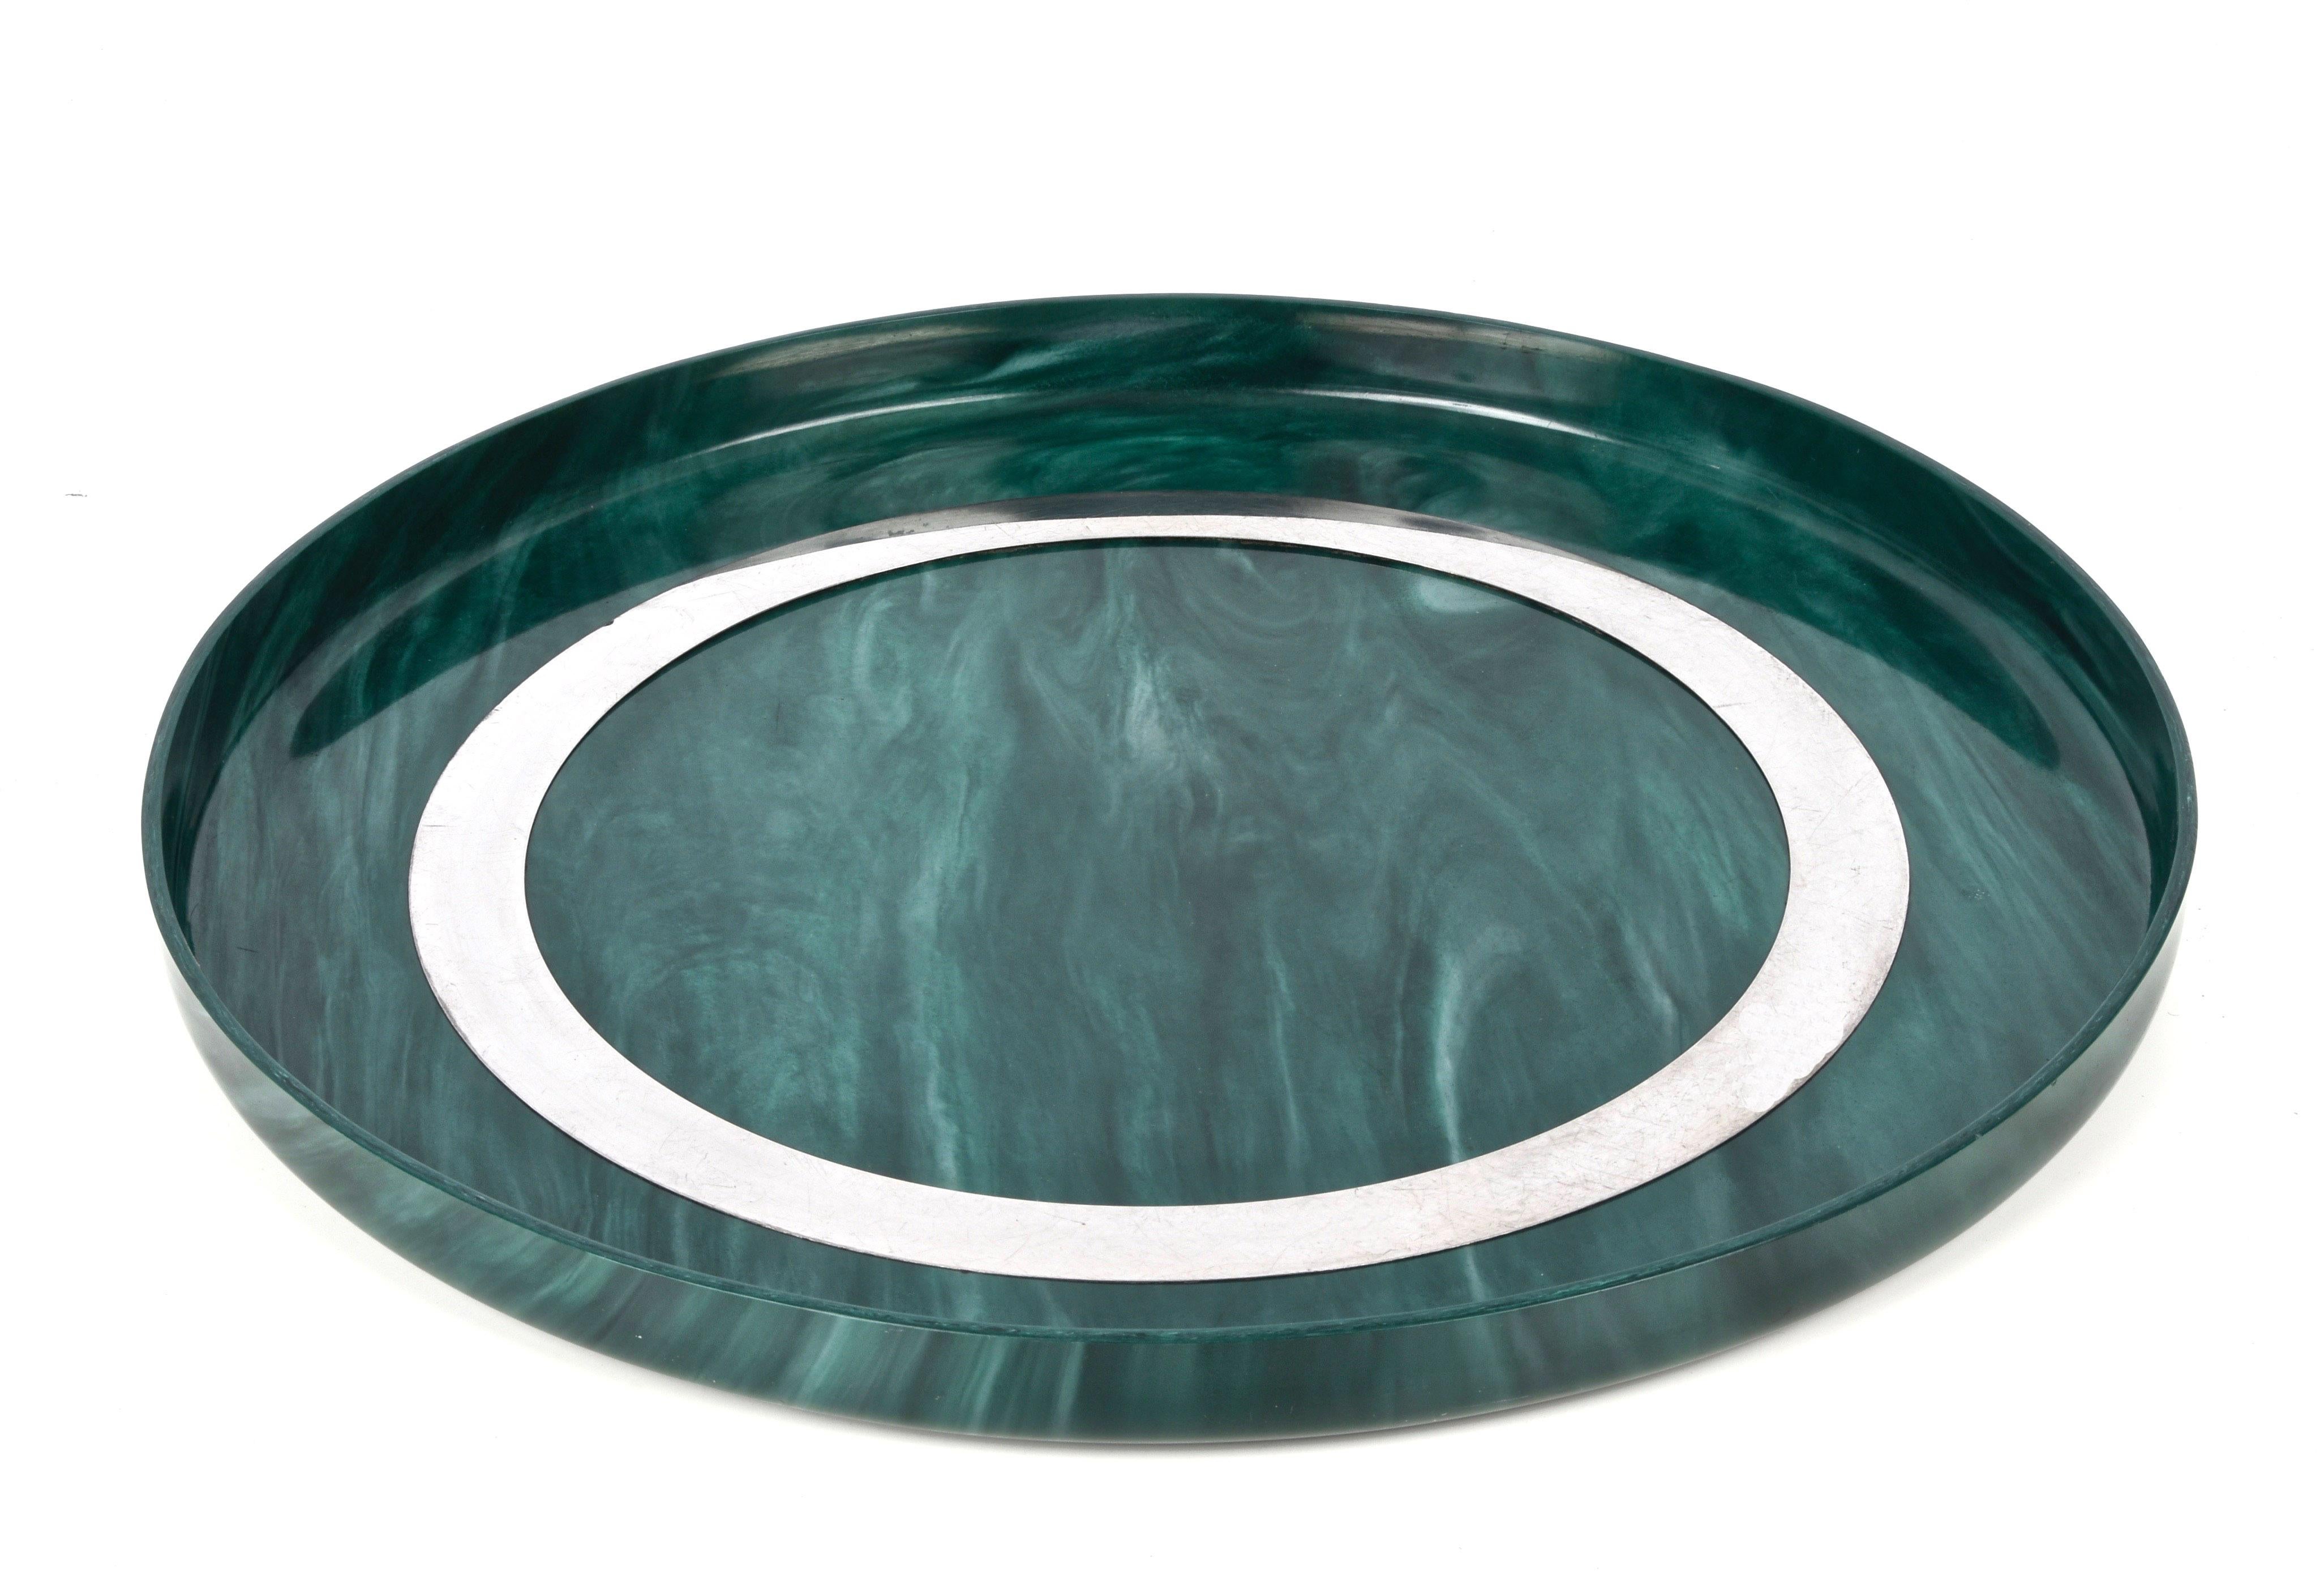 Wonderful mid-century emerald green bakelite serving piece. This wonderful piece is based on a drawing in the style of Willy Rizzo and was made in Italy during the 1980s. 

It is an iconic round bakelite tray with a steel circle and it will amaze